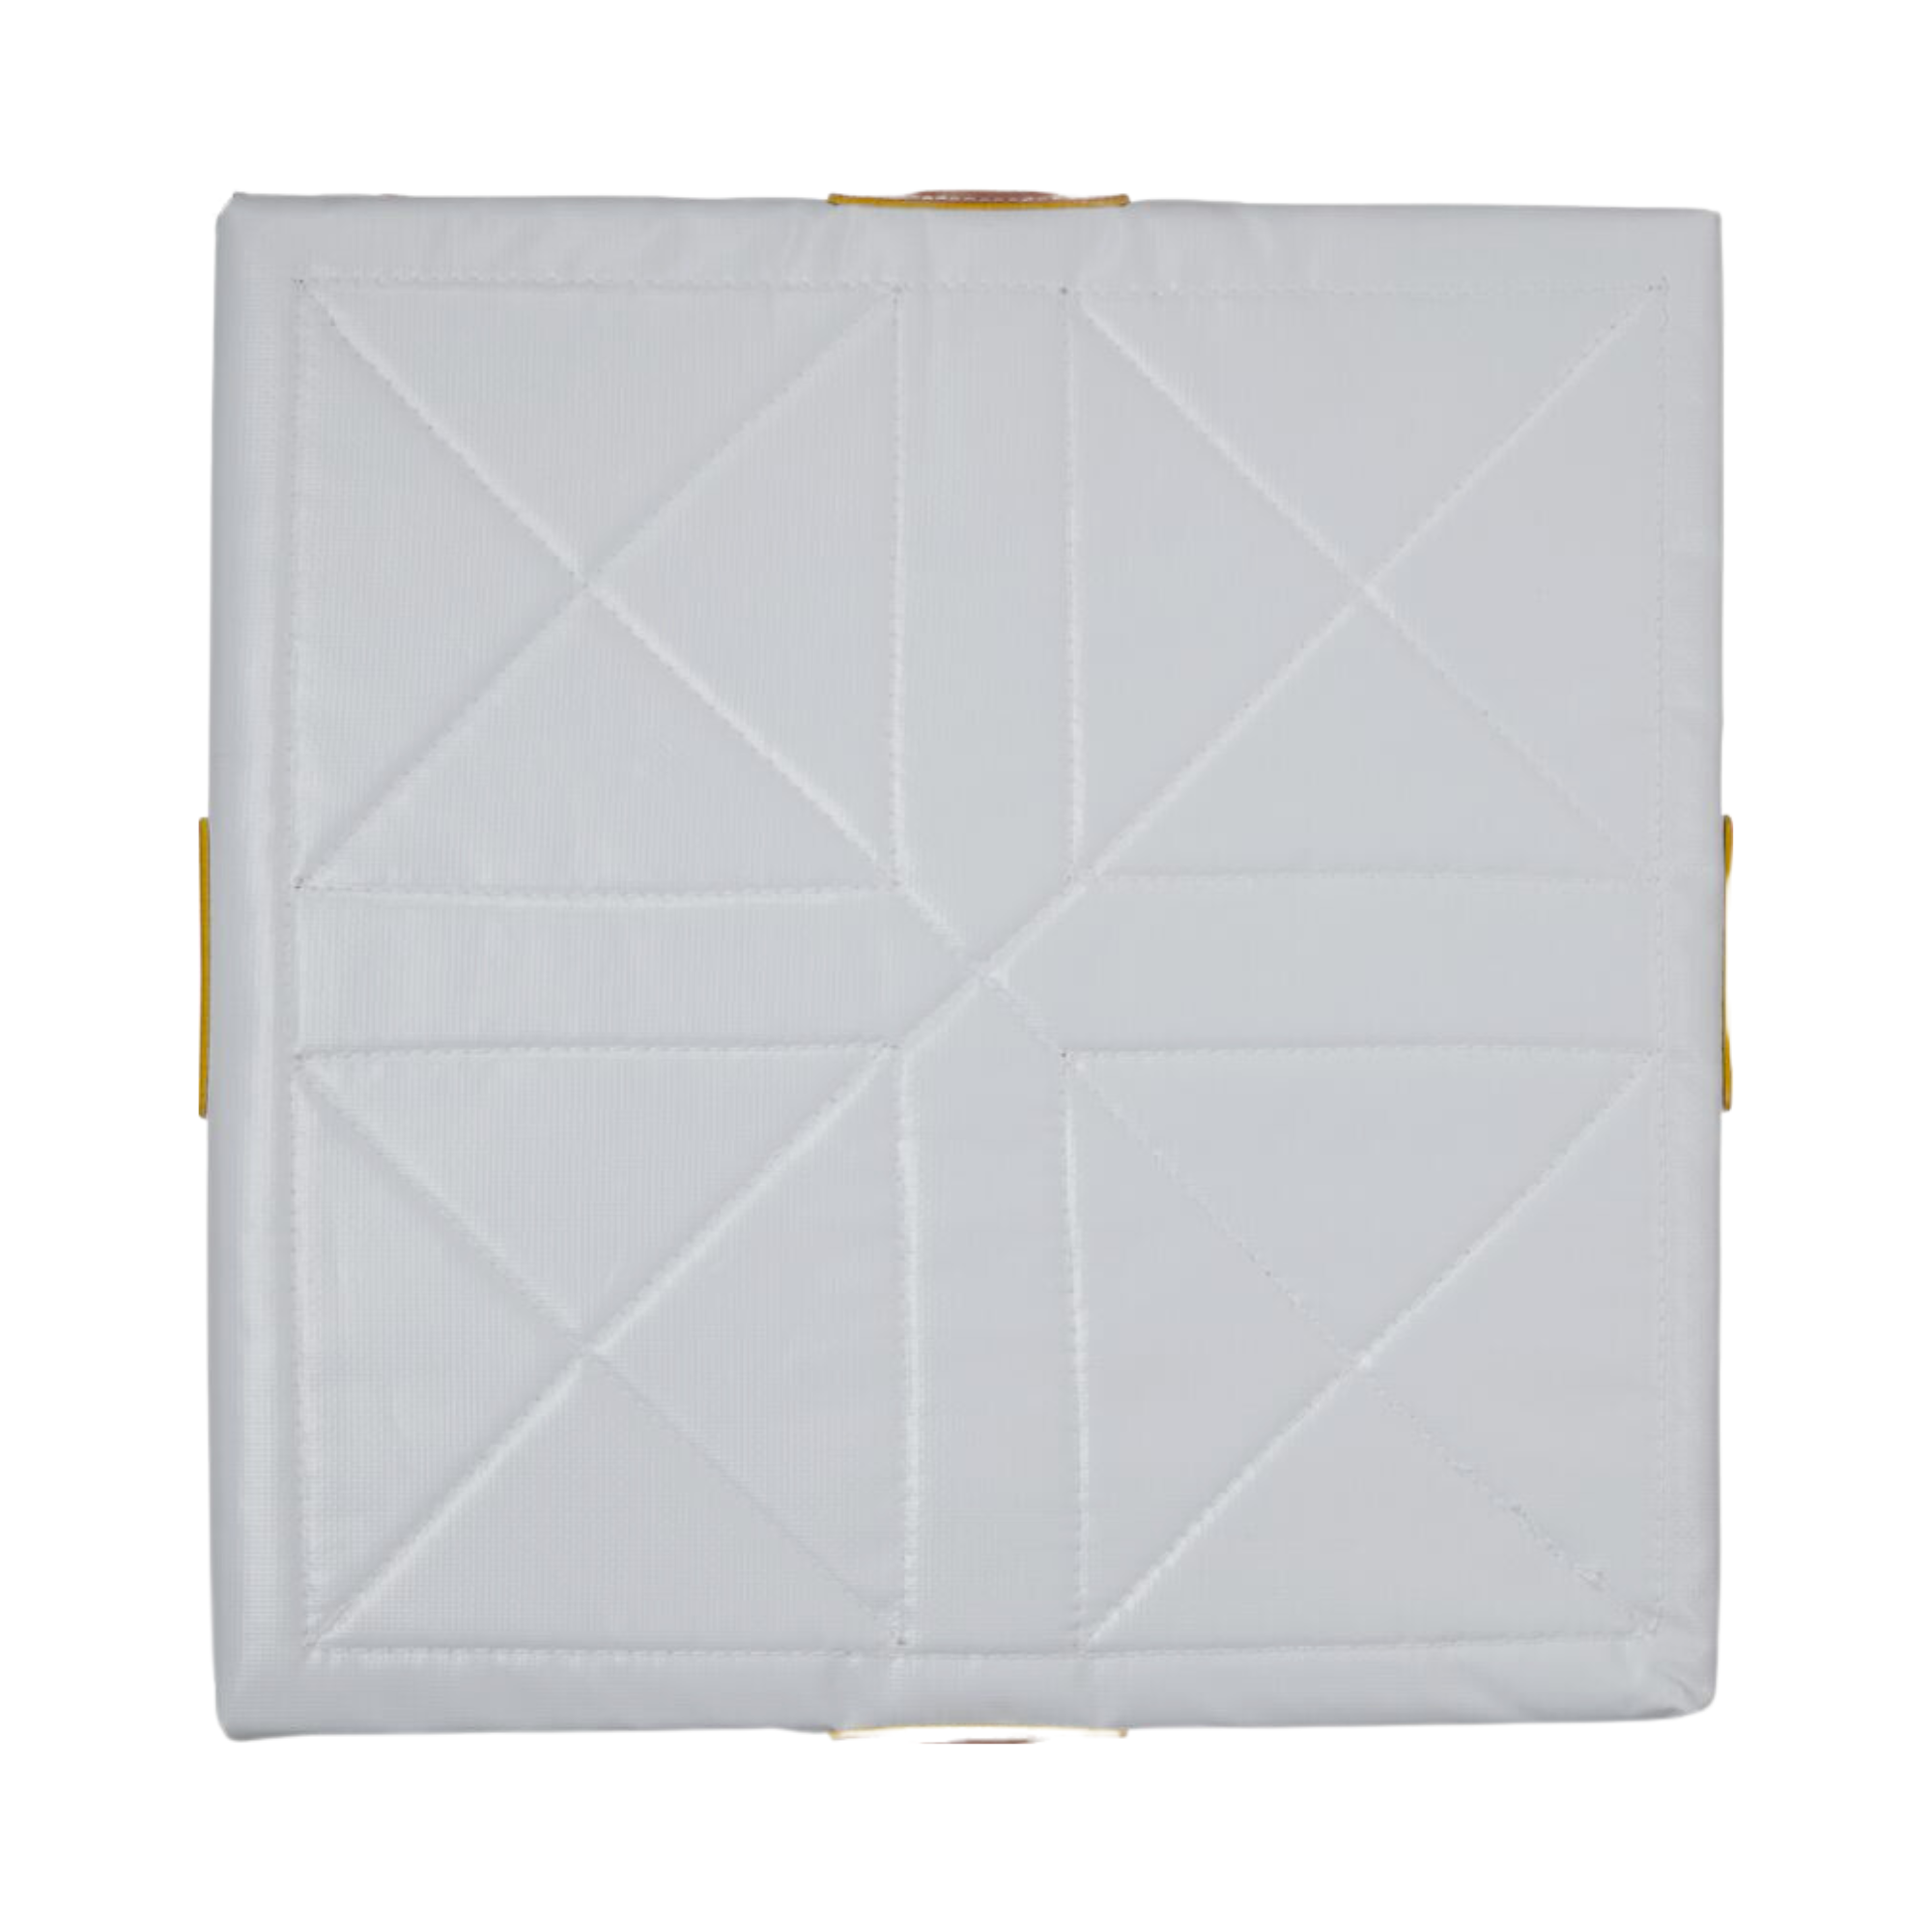 Rawlings Quilted Base Set - Set Of 3 Youth Bases - 14" X 14" X 2"